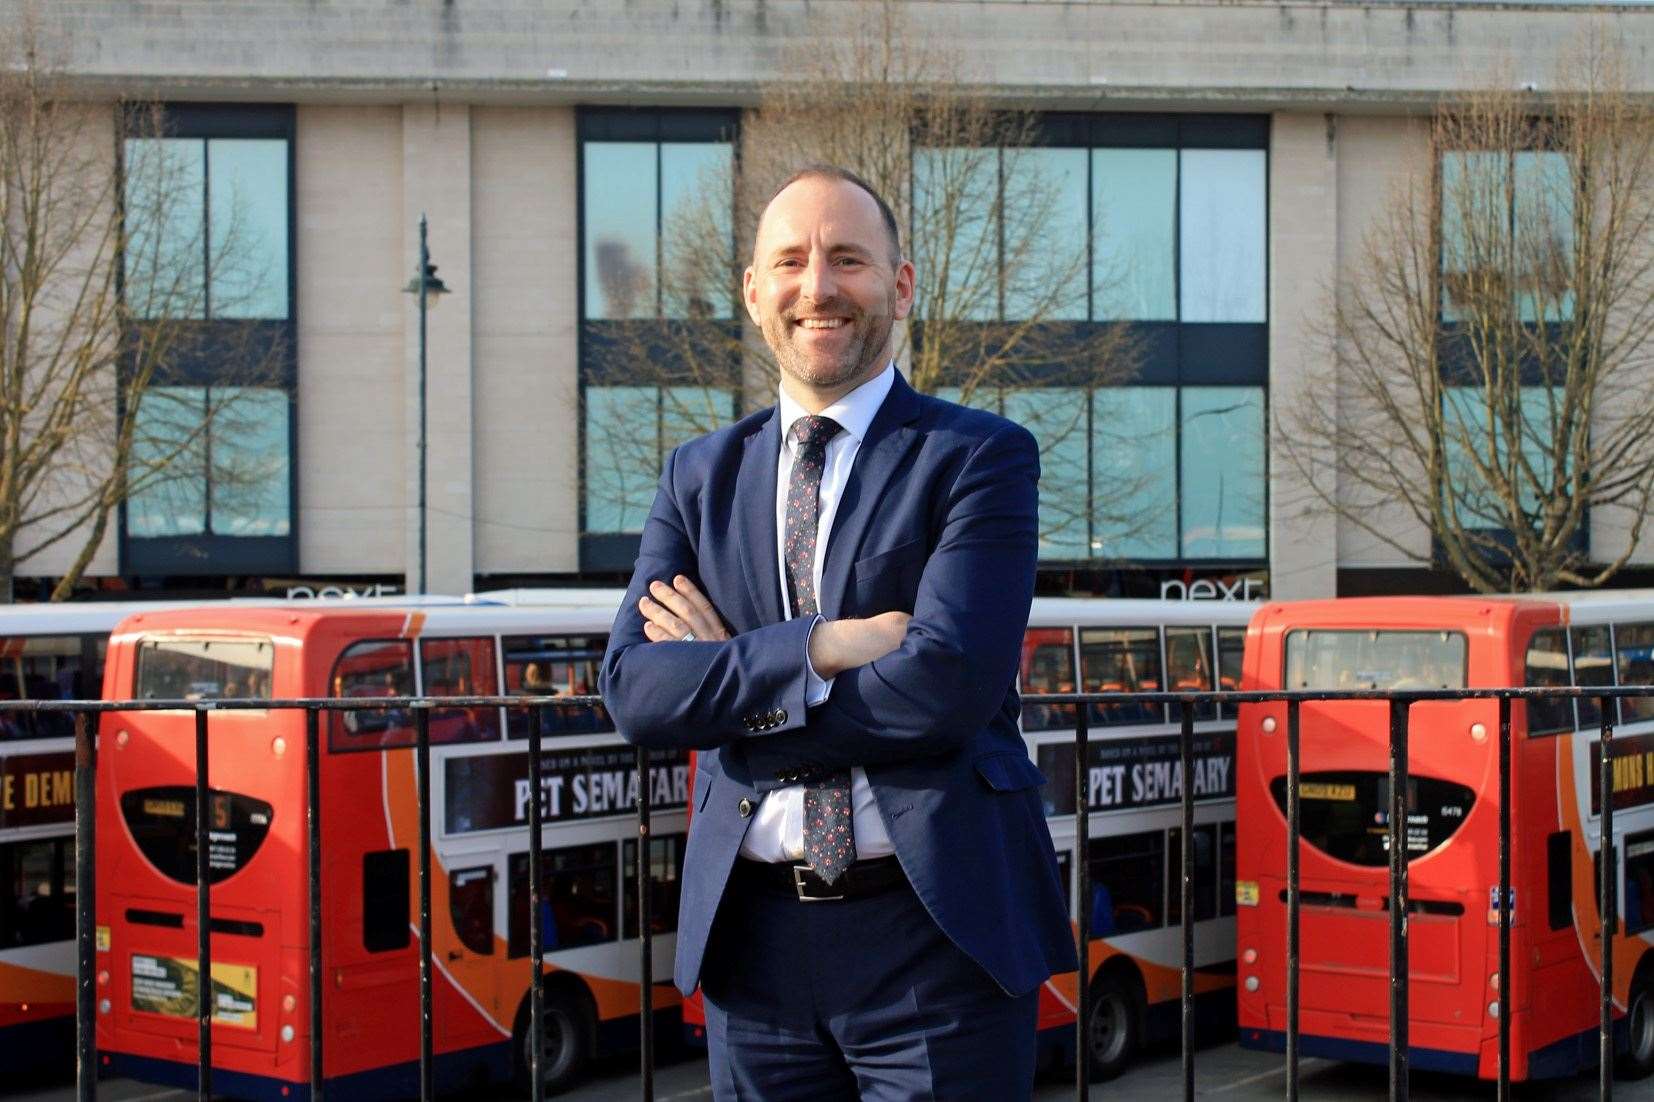 Stagecoach South East’s managing director Joel Mitchell confirmed the service connecting Lympne to the William Harvey would be reinstated